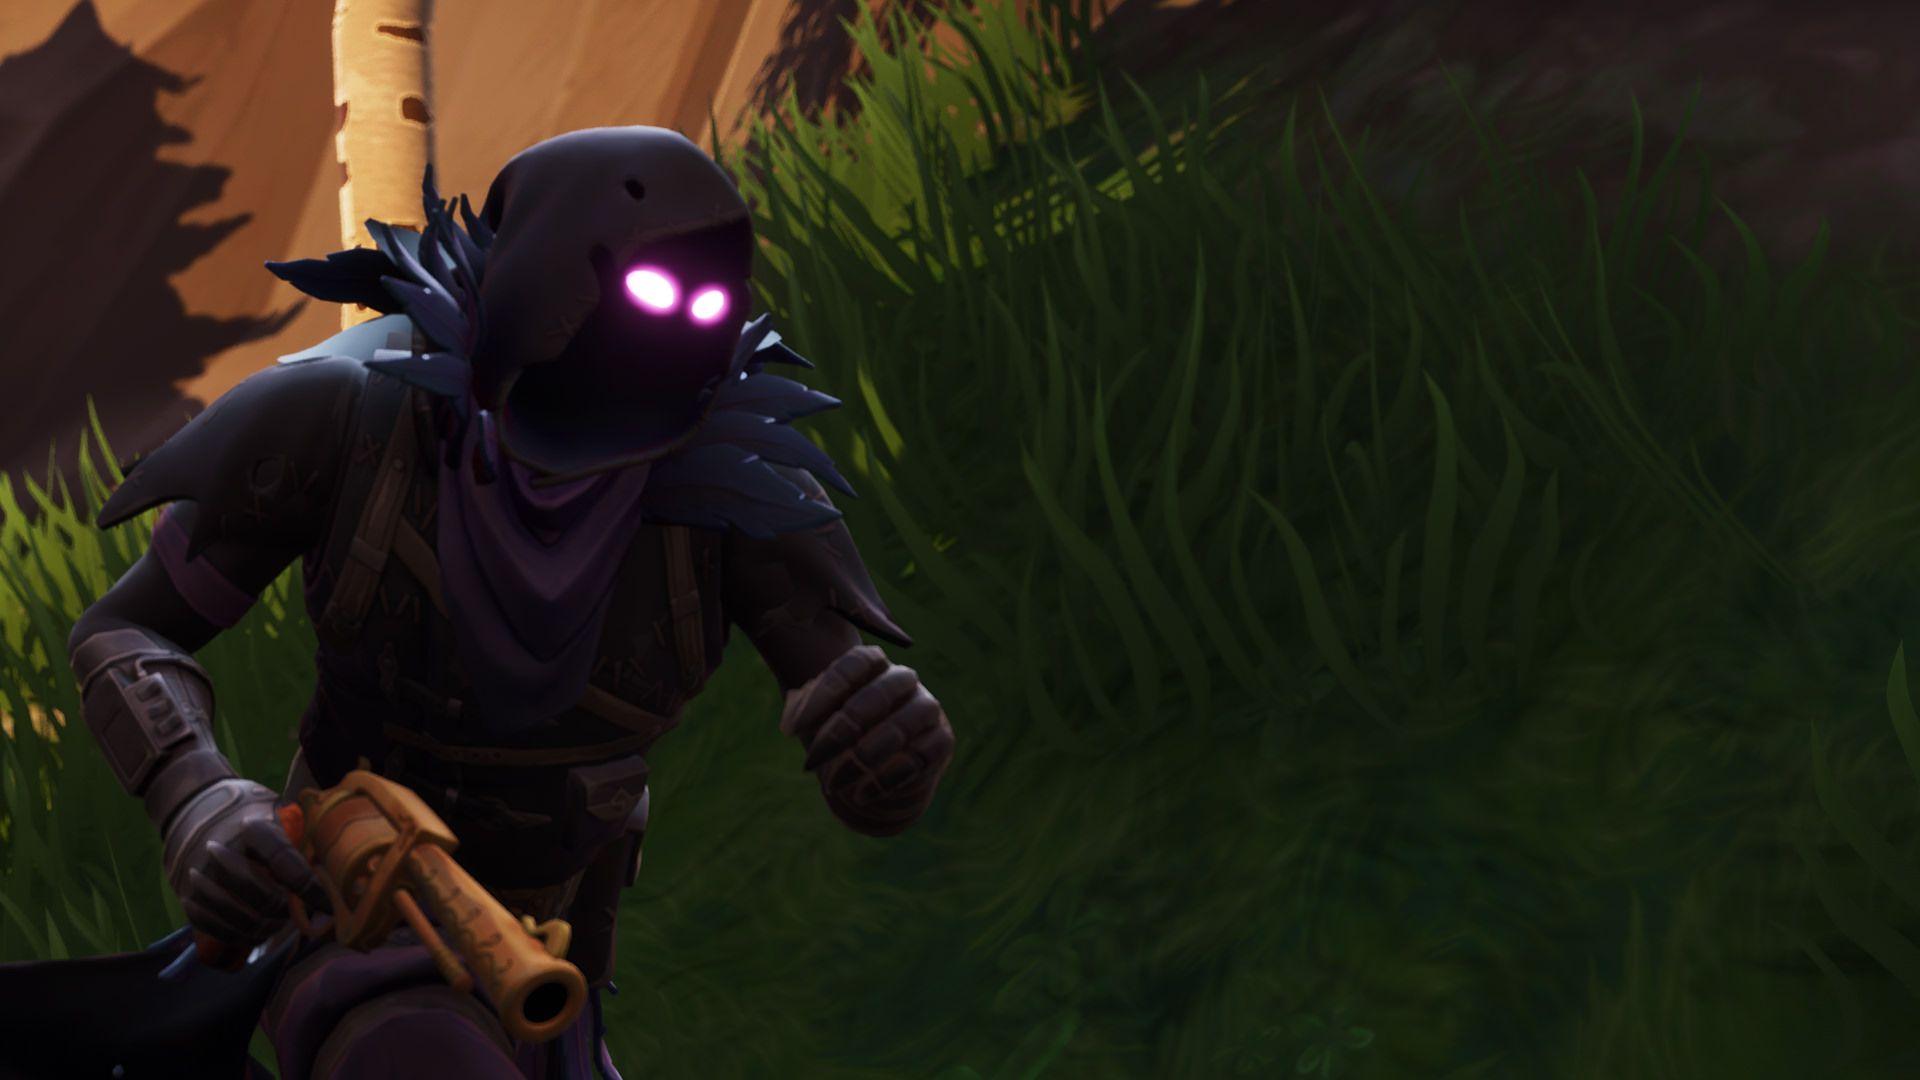 Download wallpapers raven fortnite for desktop free High Quality HD  pictures wallpapers  Page 1